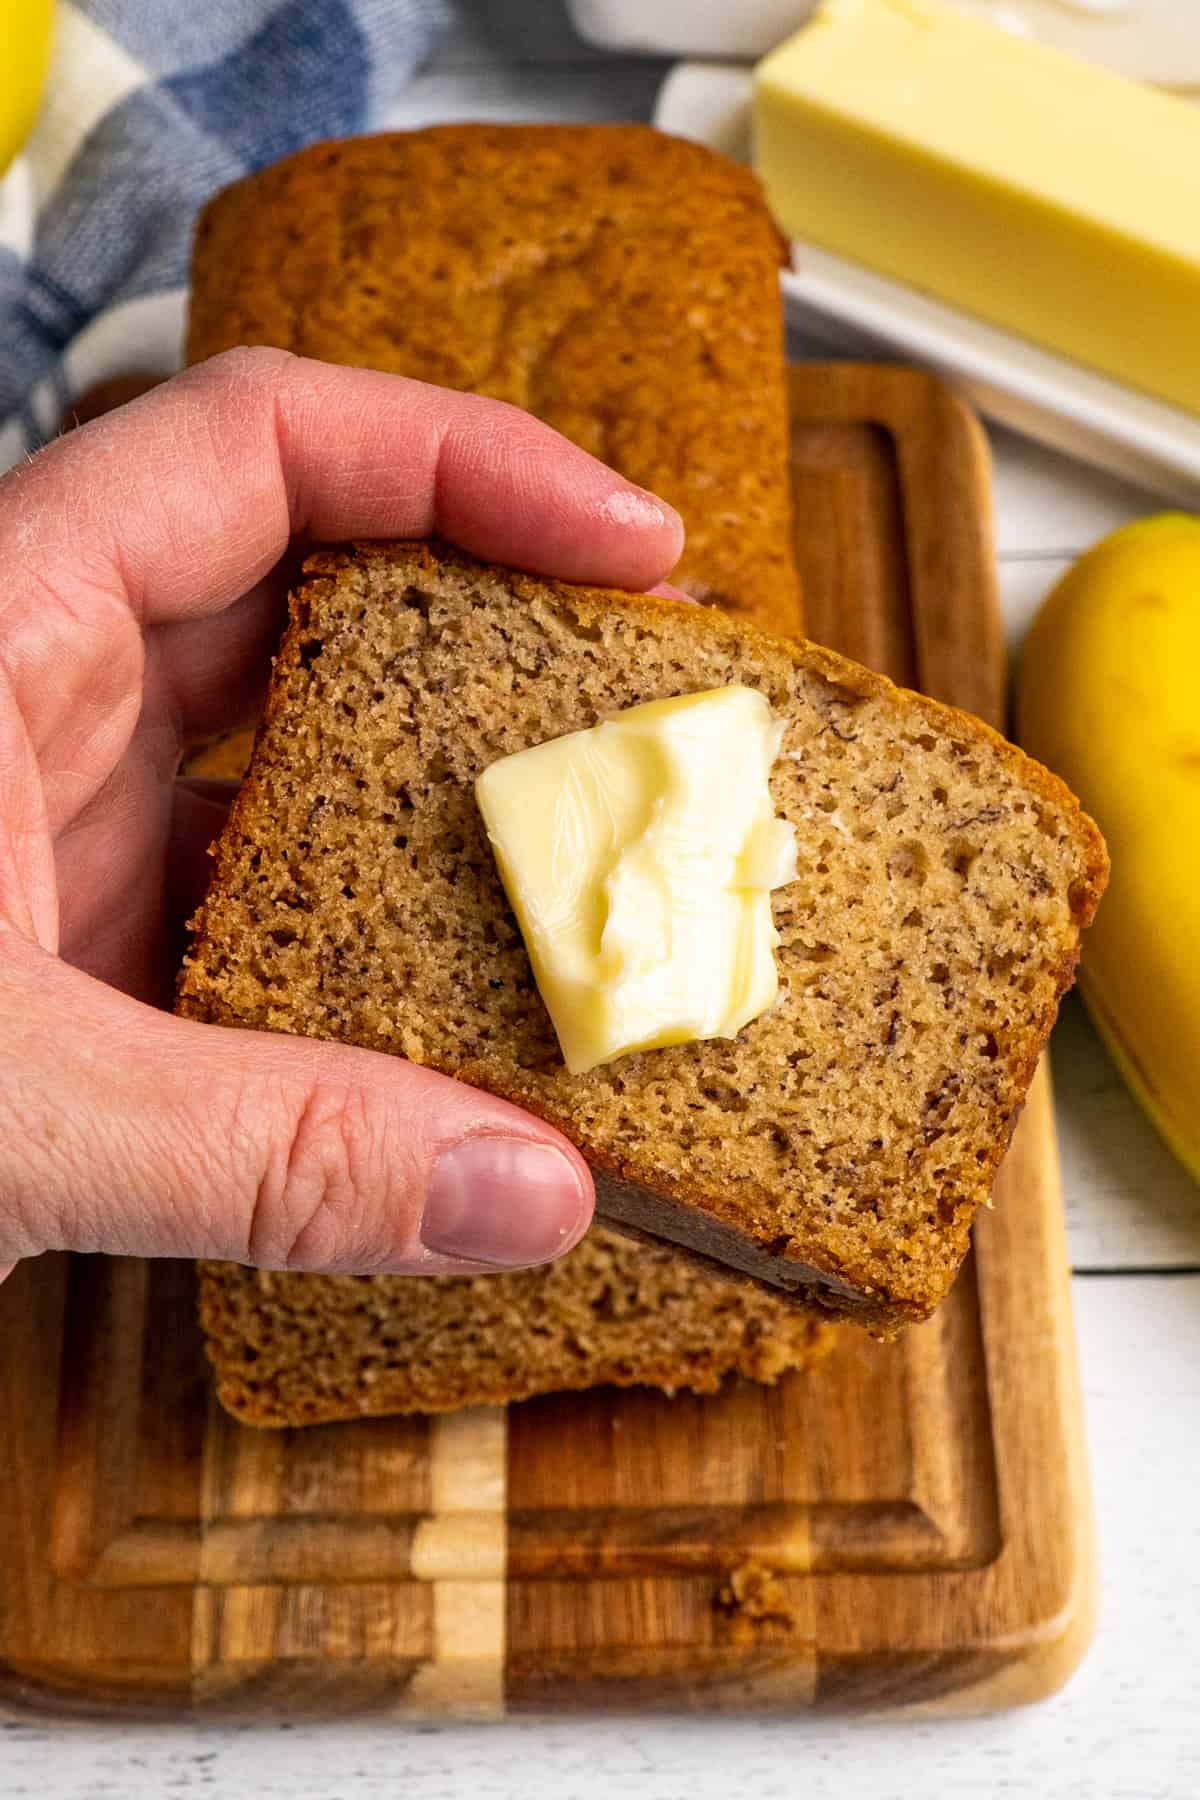 A hand holding a piece of banana bread with butter on it.